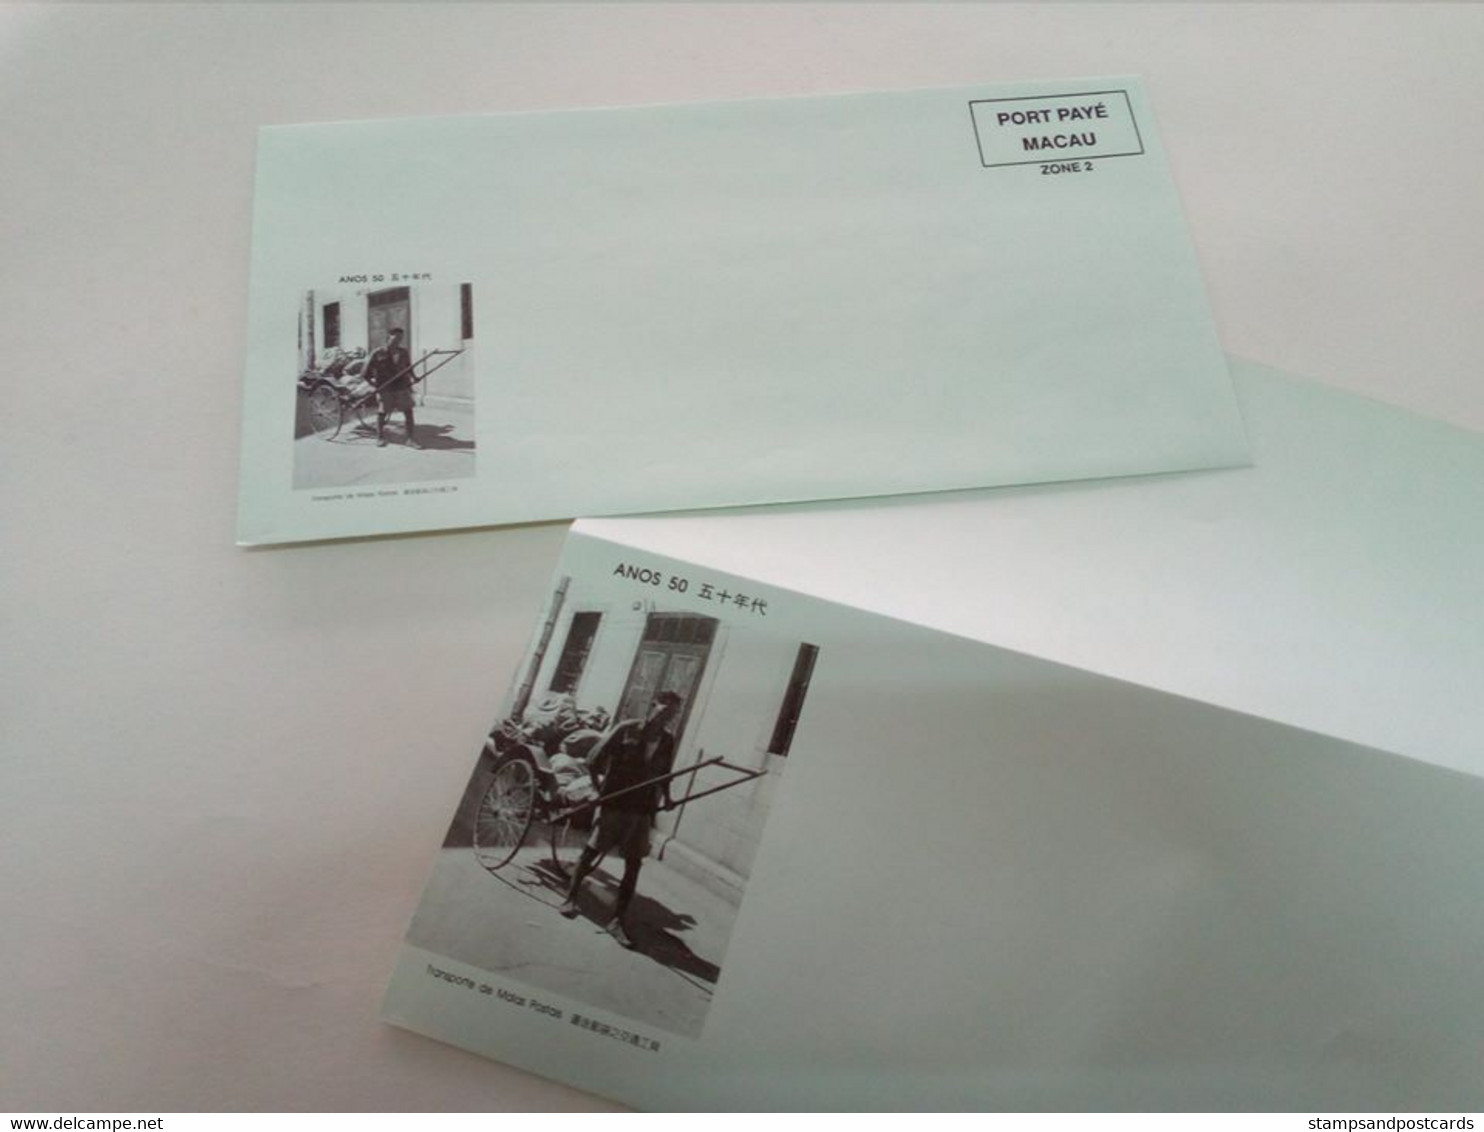 Macau Portugal Chine Entier Postal PAP Transport Courrier Pousse-pousse 1990 Macao China Stationery Cover Mail Rickshaw - Postal Stationery